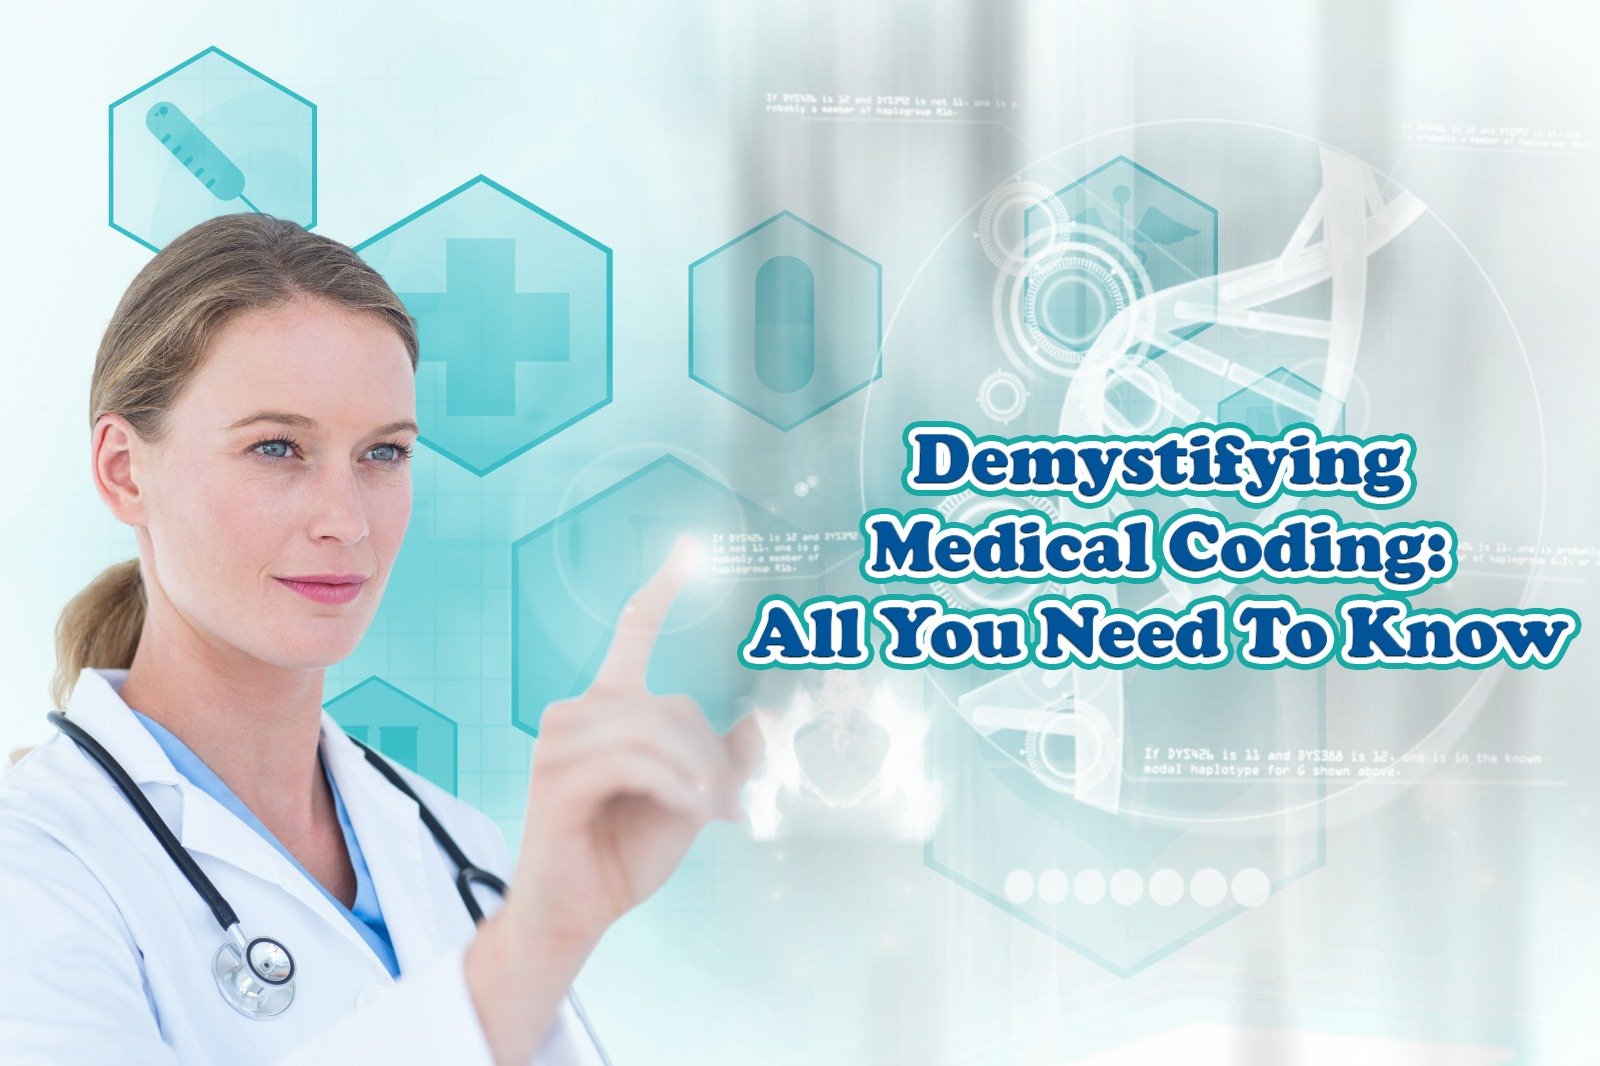 Demystifying Medical Coding: All You Need To Know - Ensure MBS